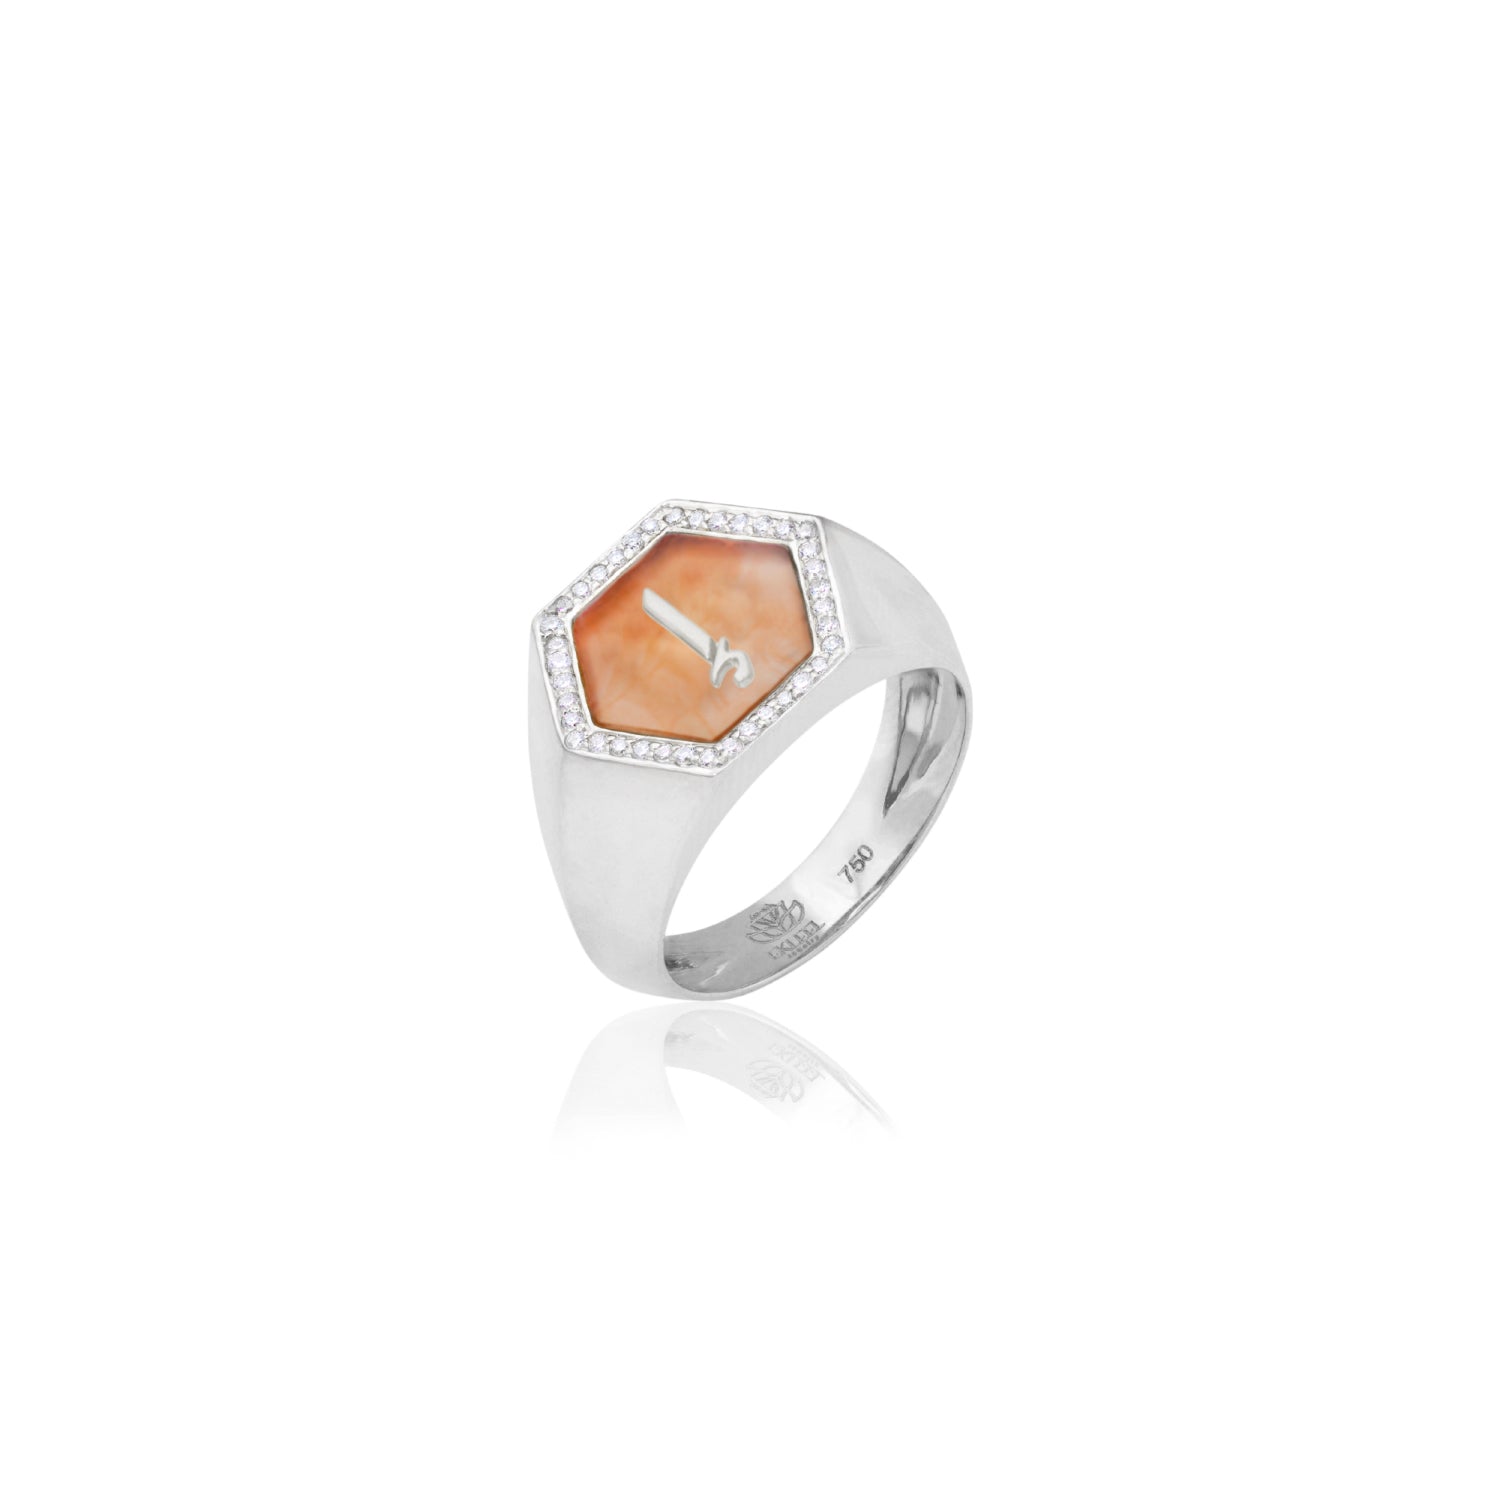 Qamoos 2.0 Letter إ Carnelian and Diamond Signet Ring in White Gold